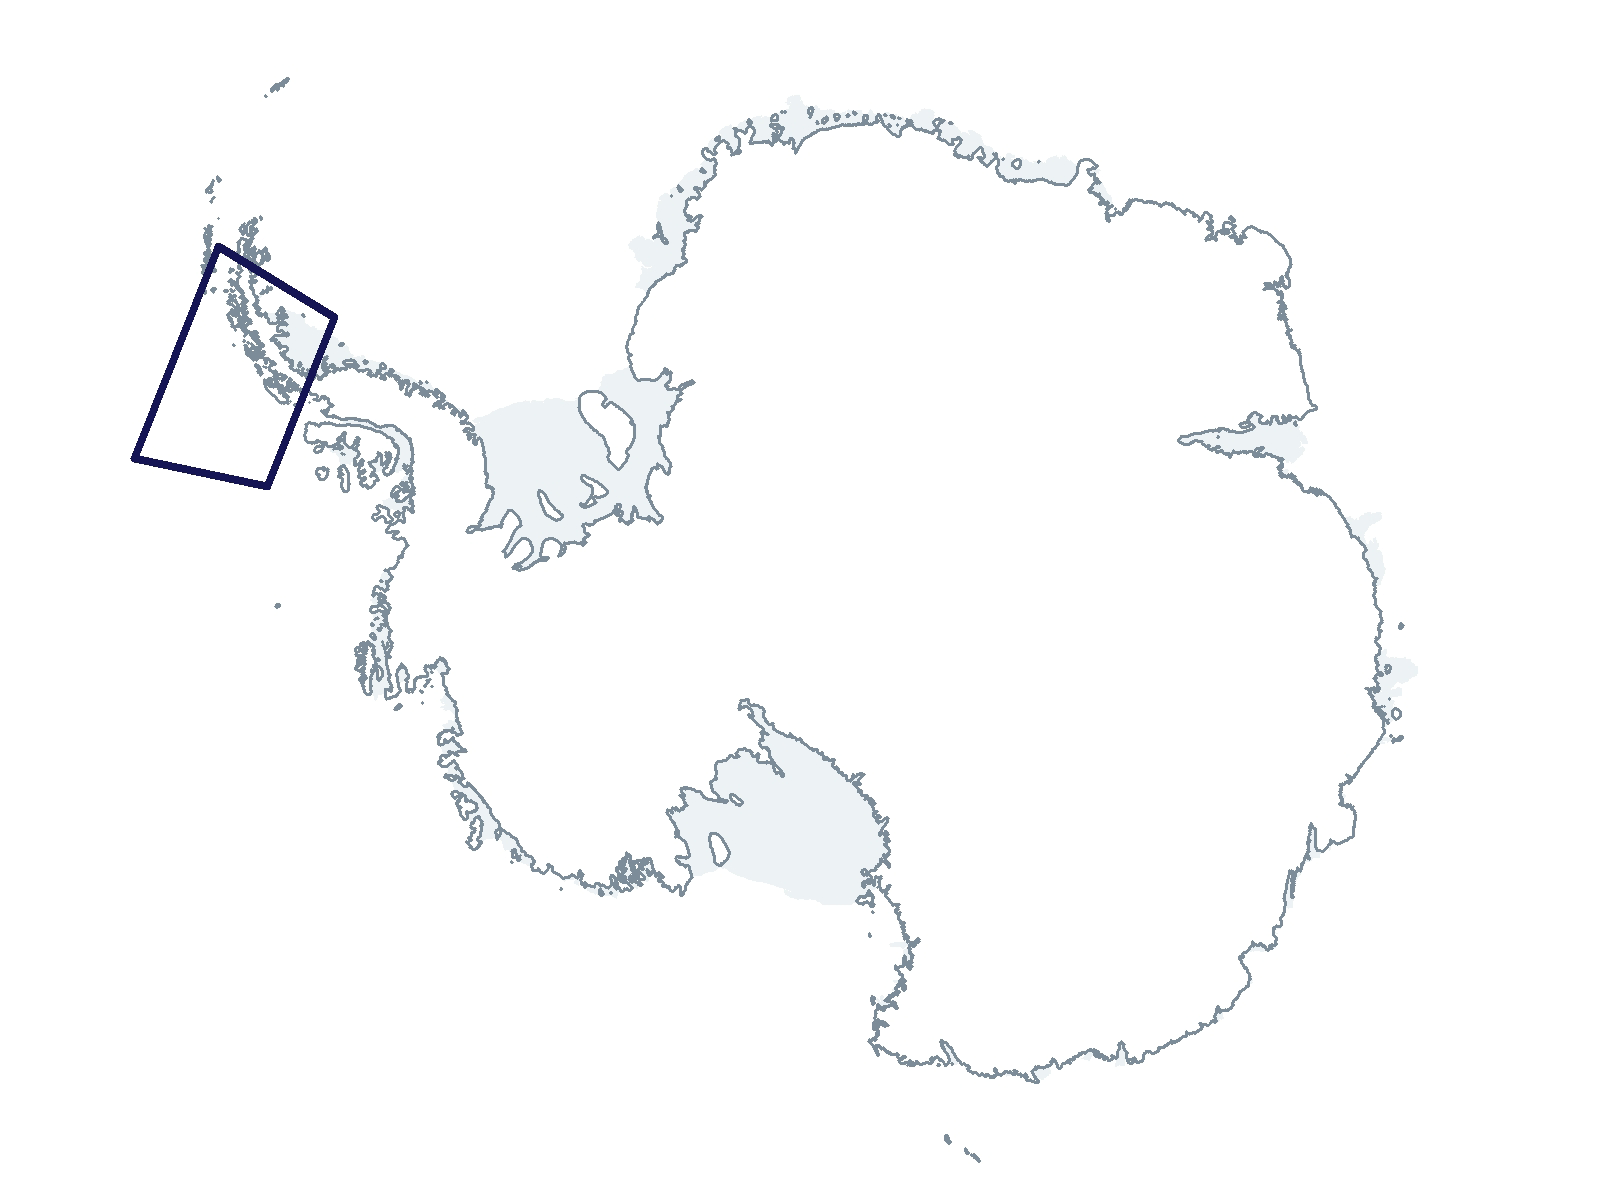 O-263-L Research Location(s): West Antarctic Peninsula